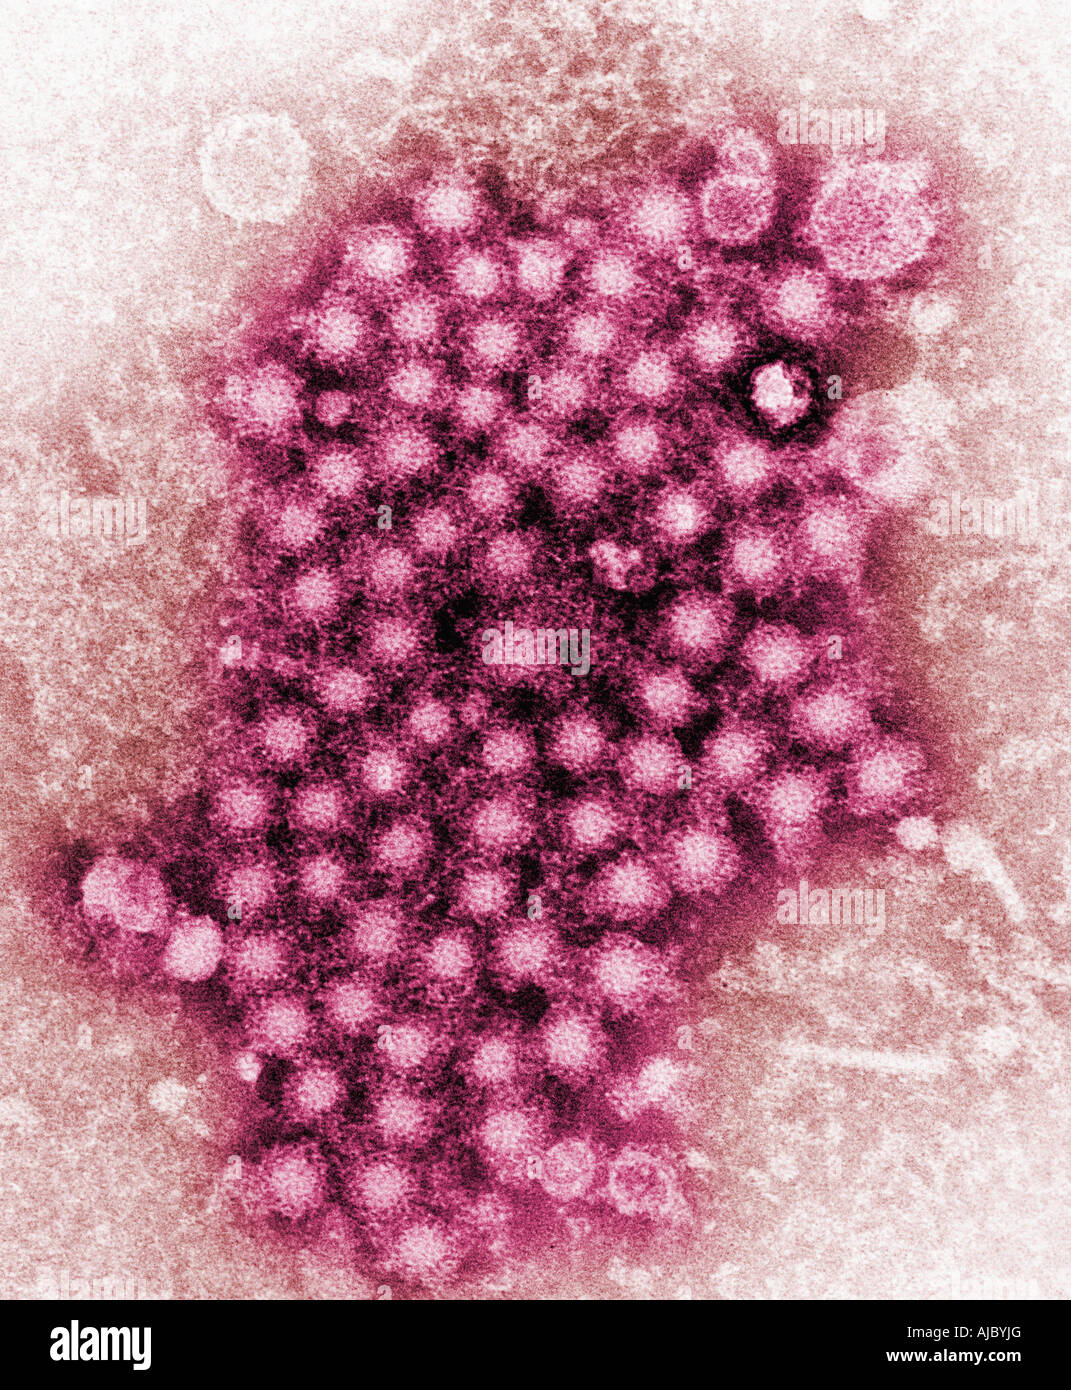 A transmission electron micrograph (TEM) showing numerous hepatitis virions, of an unknown strain. Stock Photo